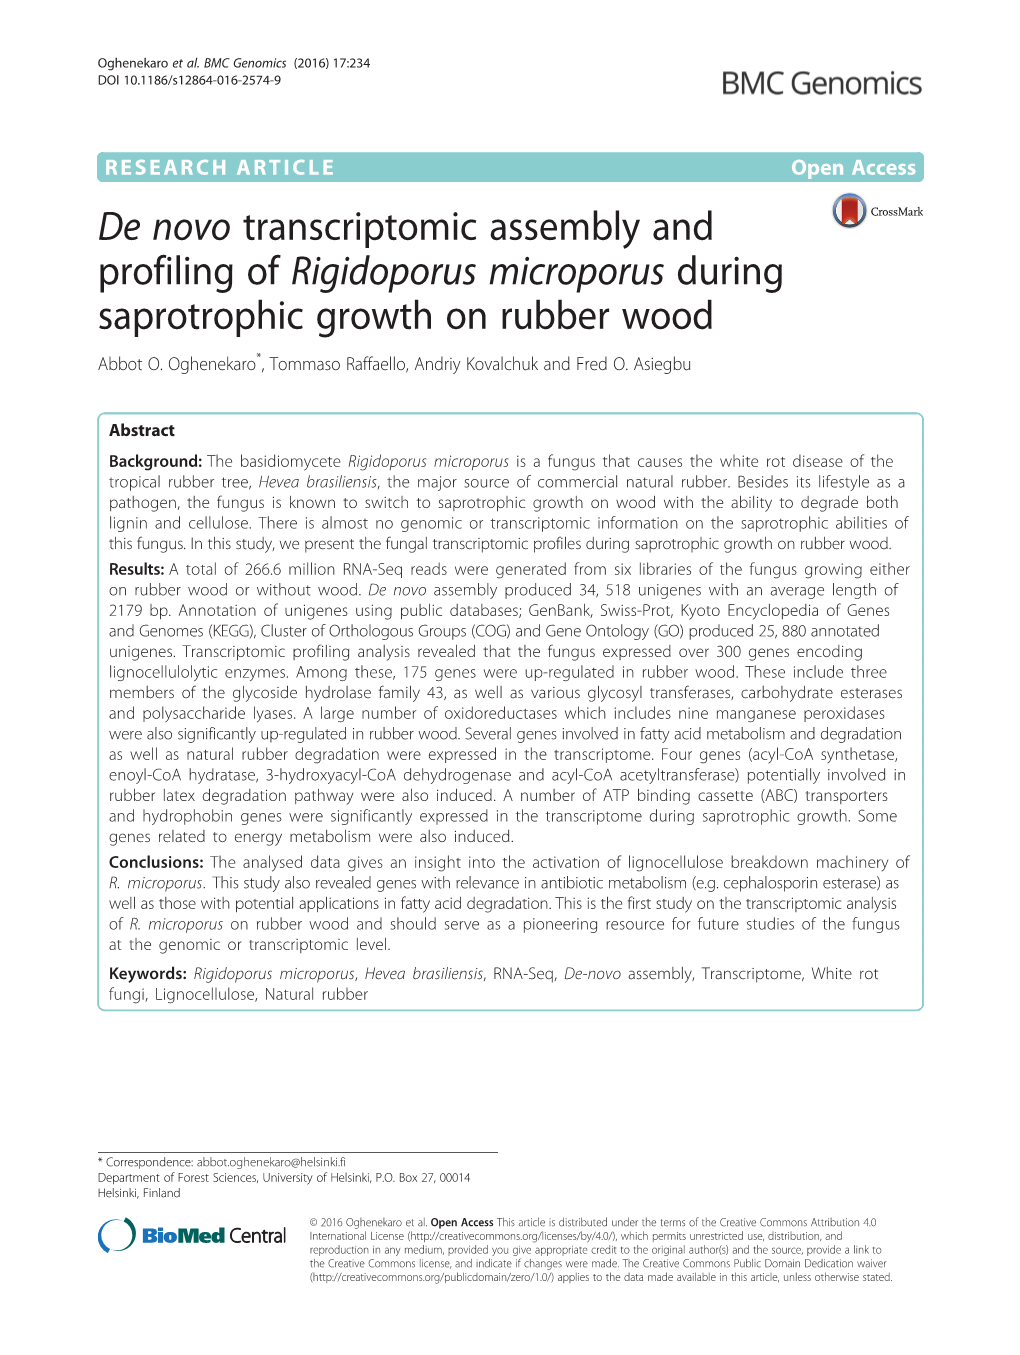 Rigidoporus Microporus During Saprotrophic Growth on Rubber Wood Abbot O